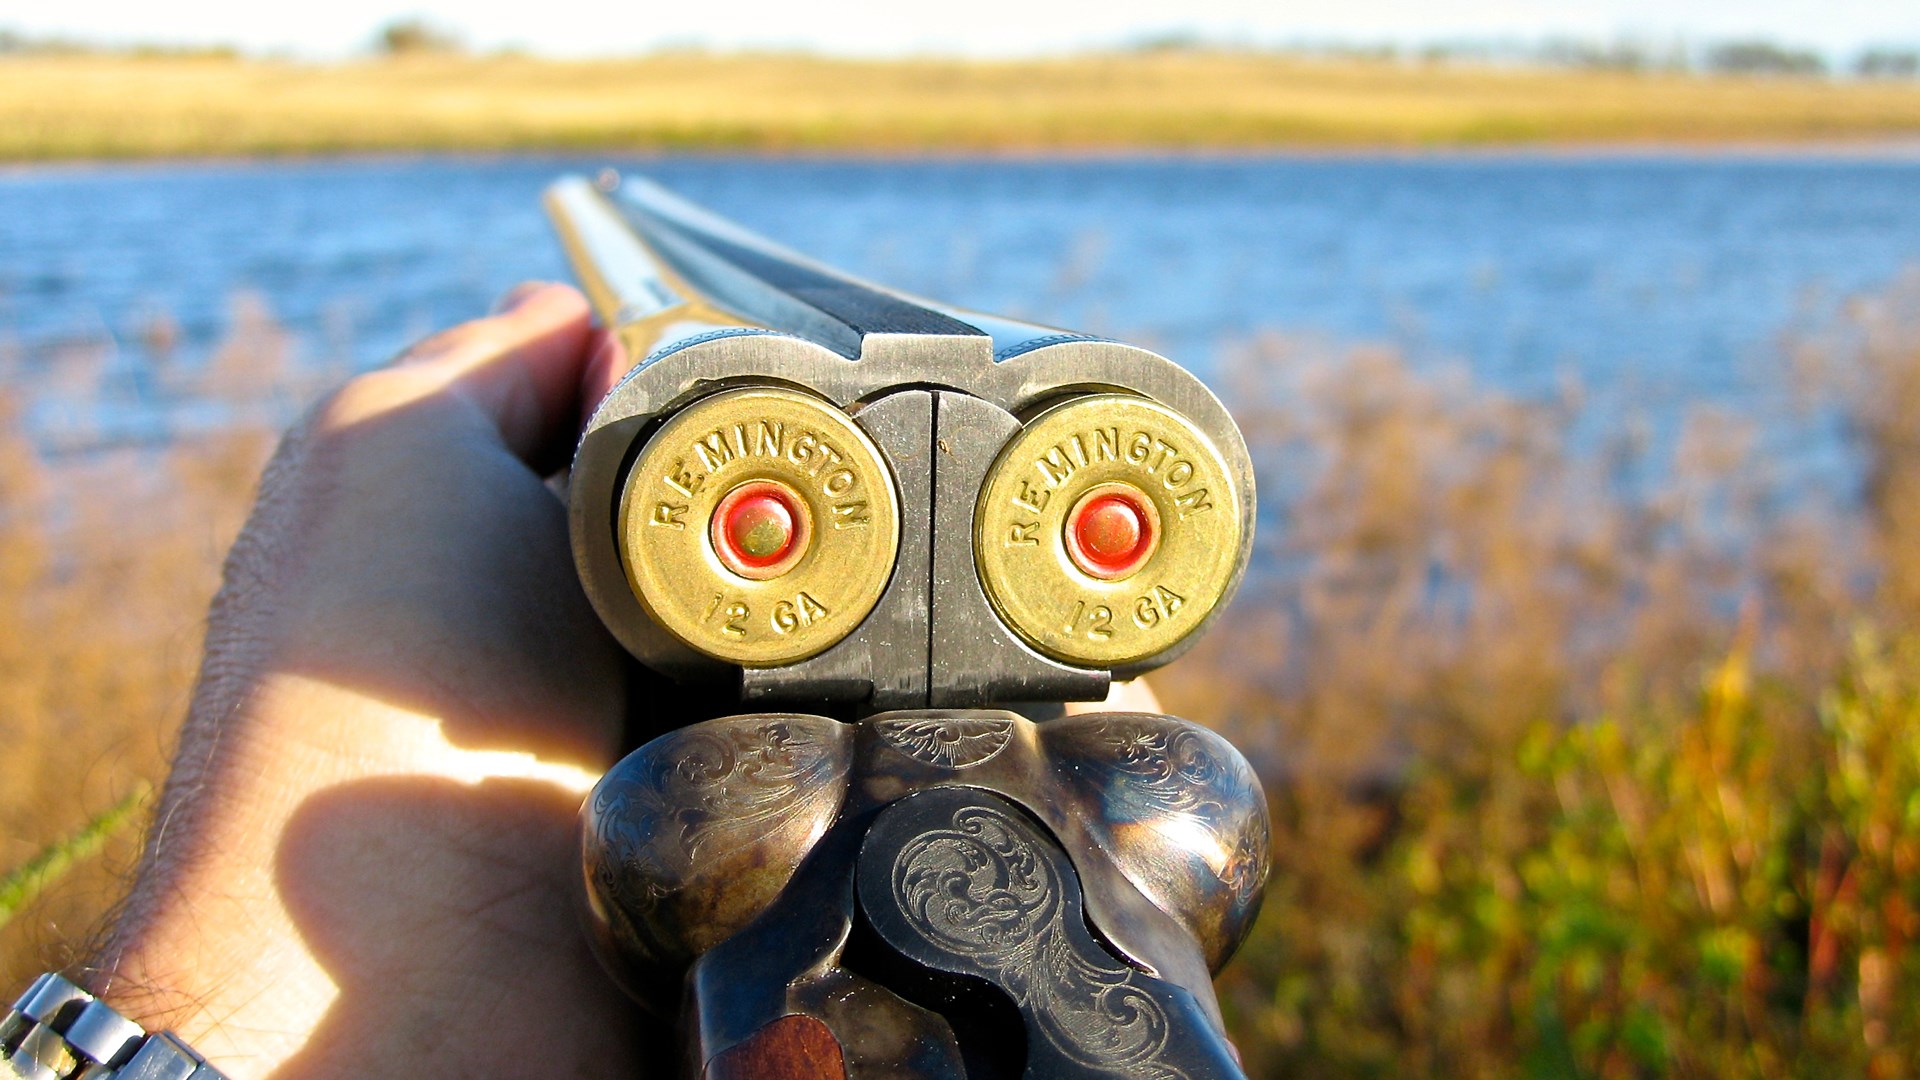 Side-by-side shotgun outdoors water background hunting hand engraving open action 12 gauge shotshells A side-by-side double provides the shooter with two instantaneous shots that can be quickly reloaded.